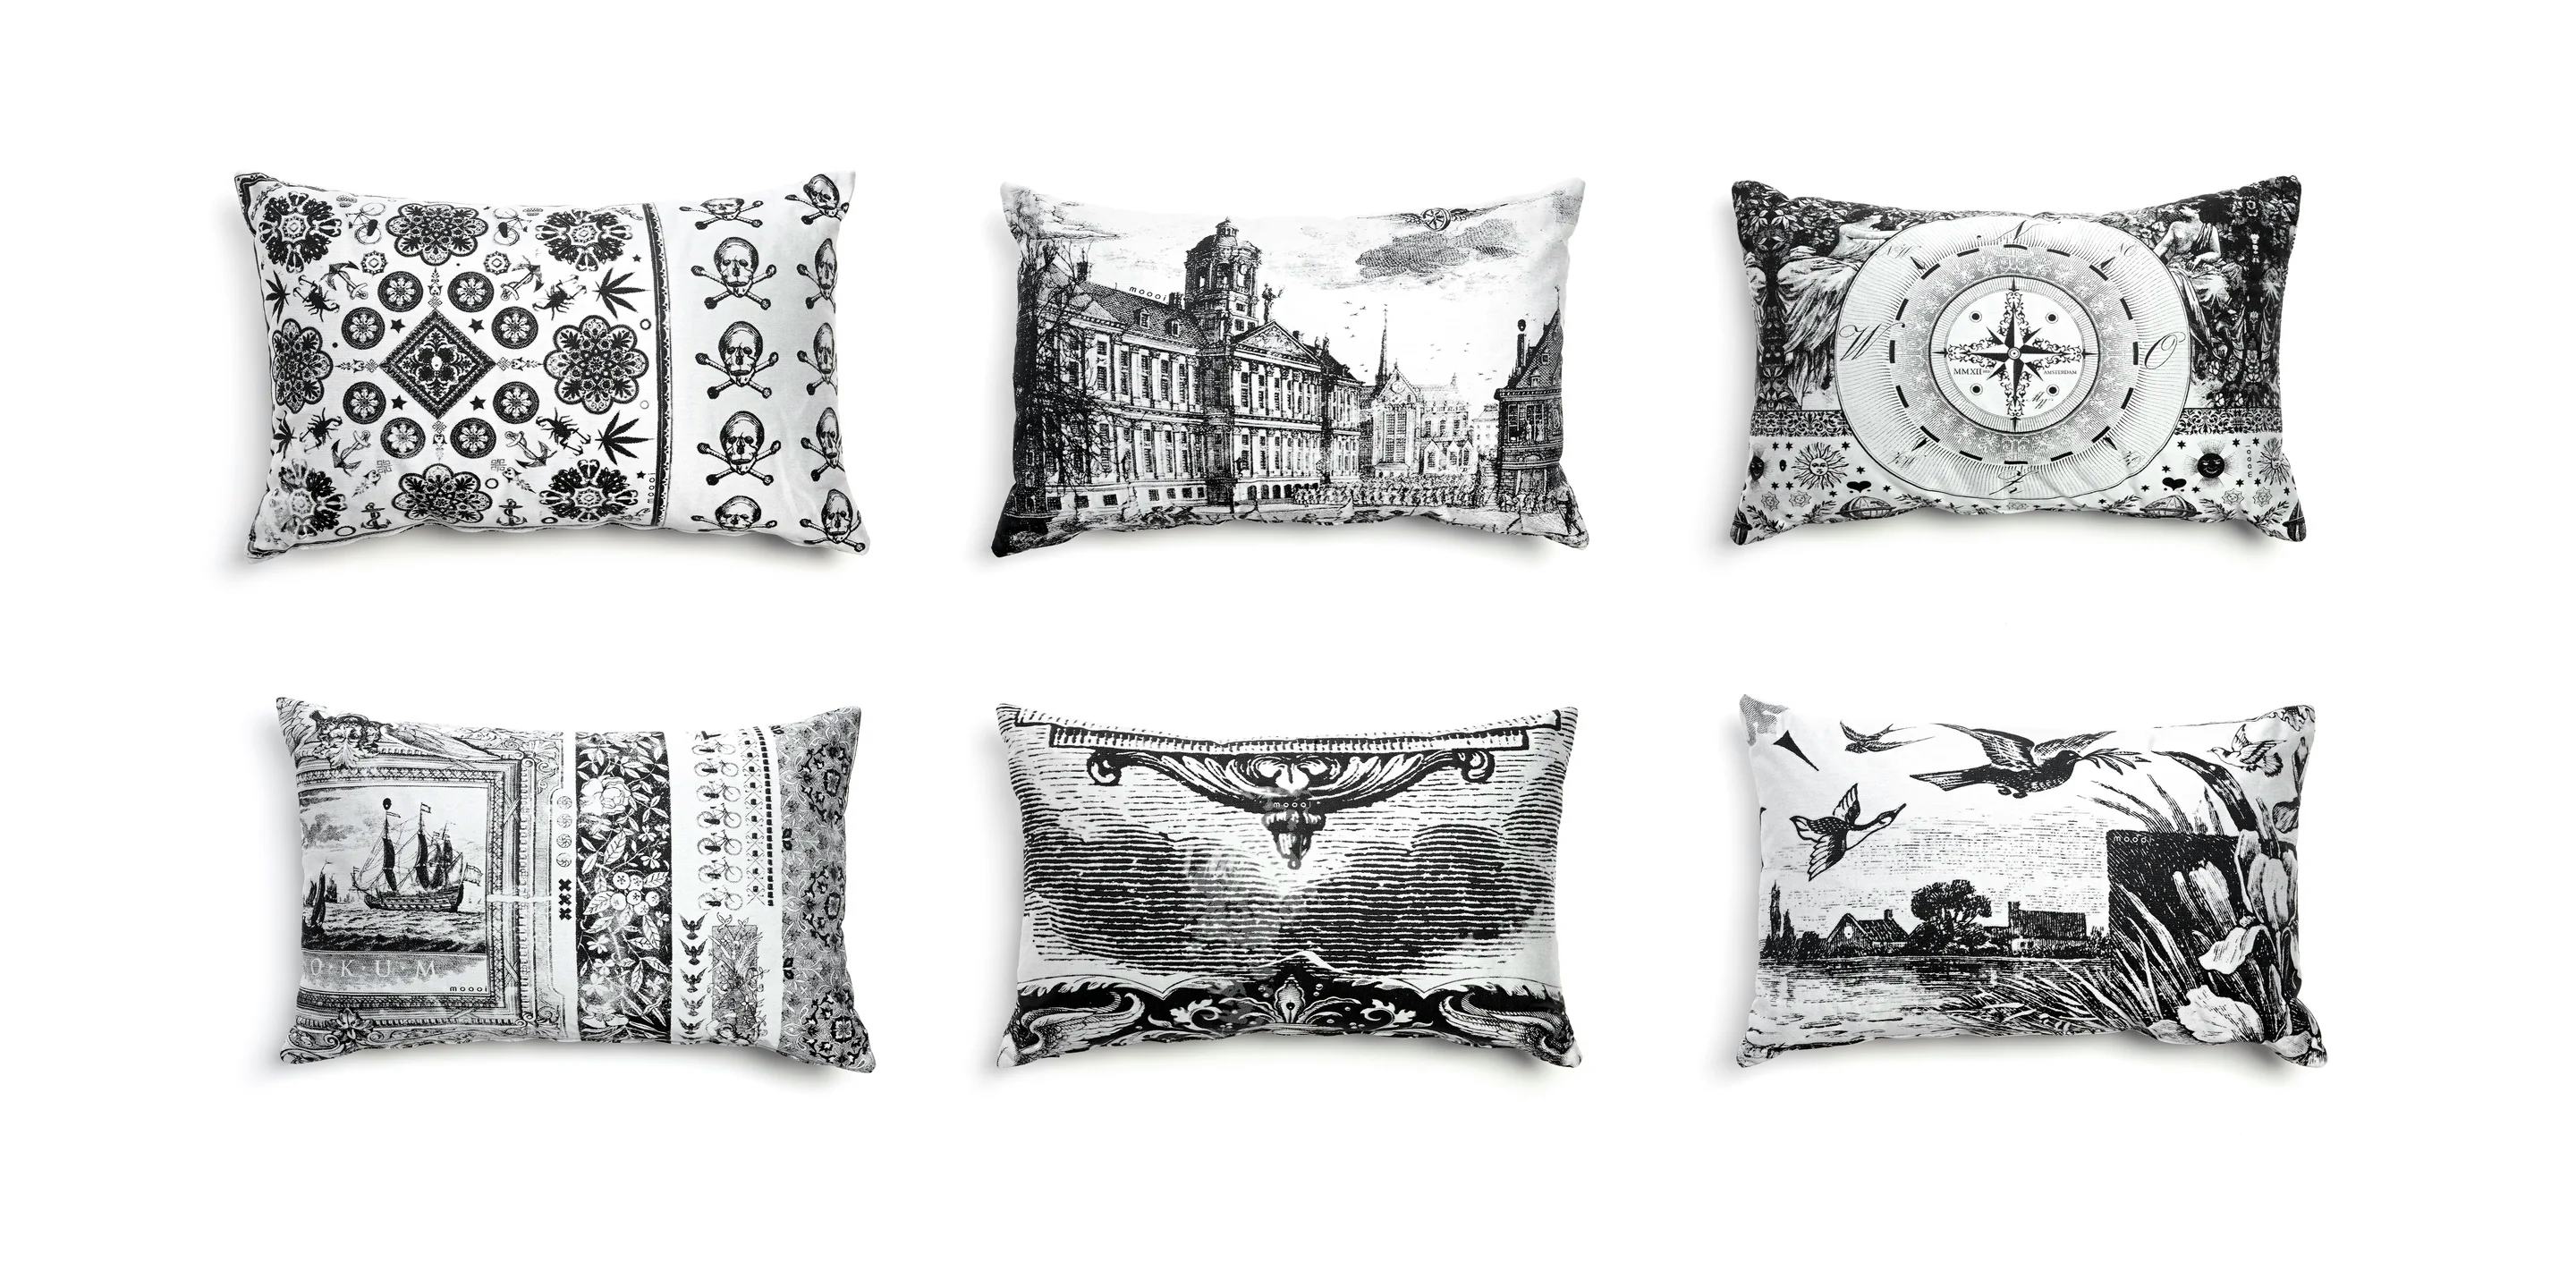 Heritage overview of 6 pillows